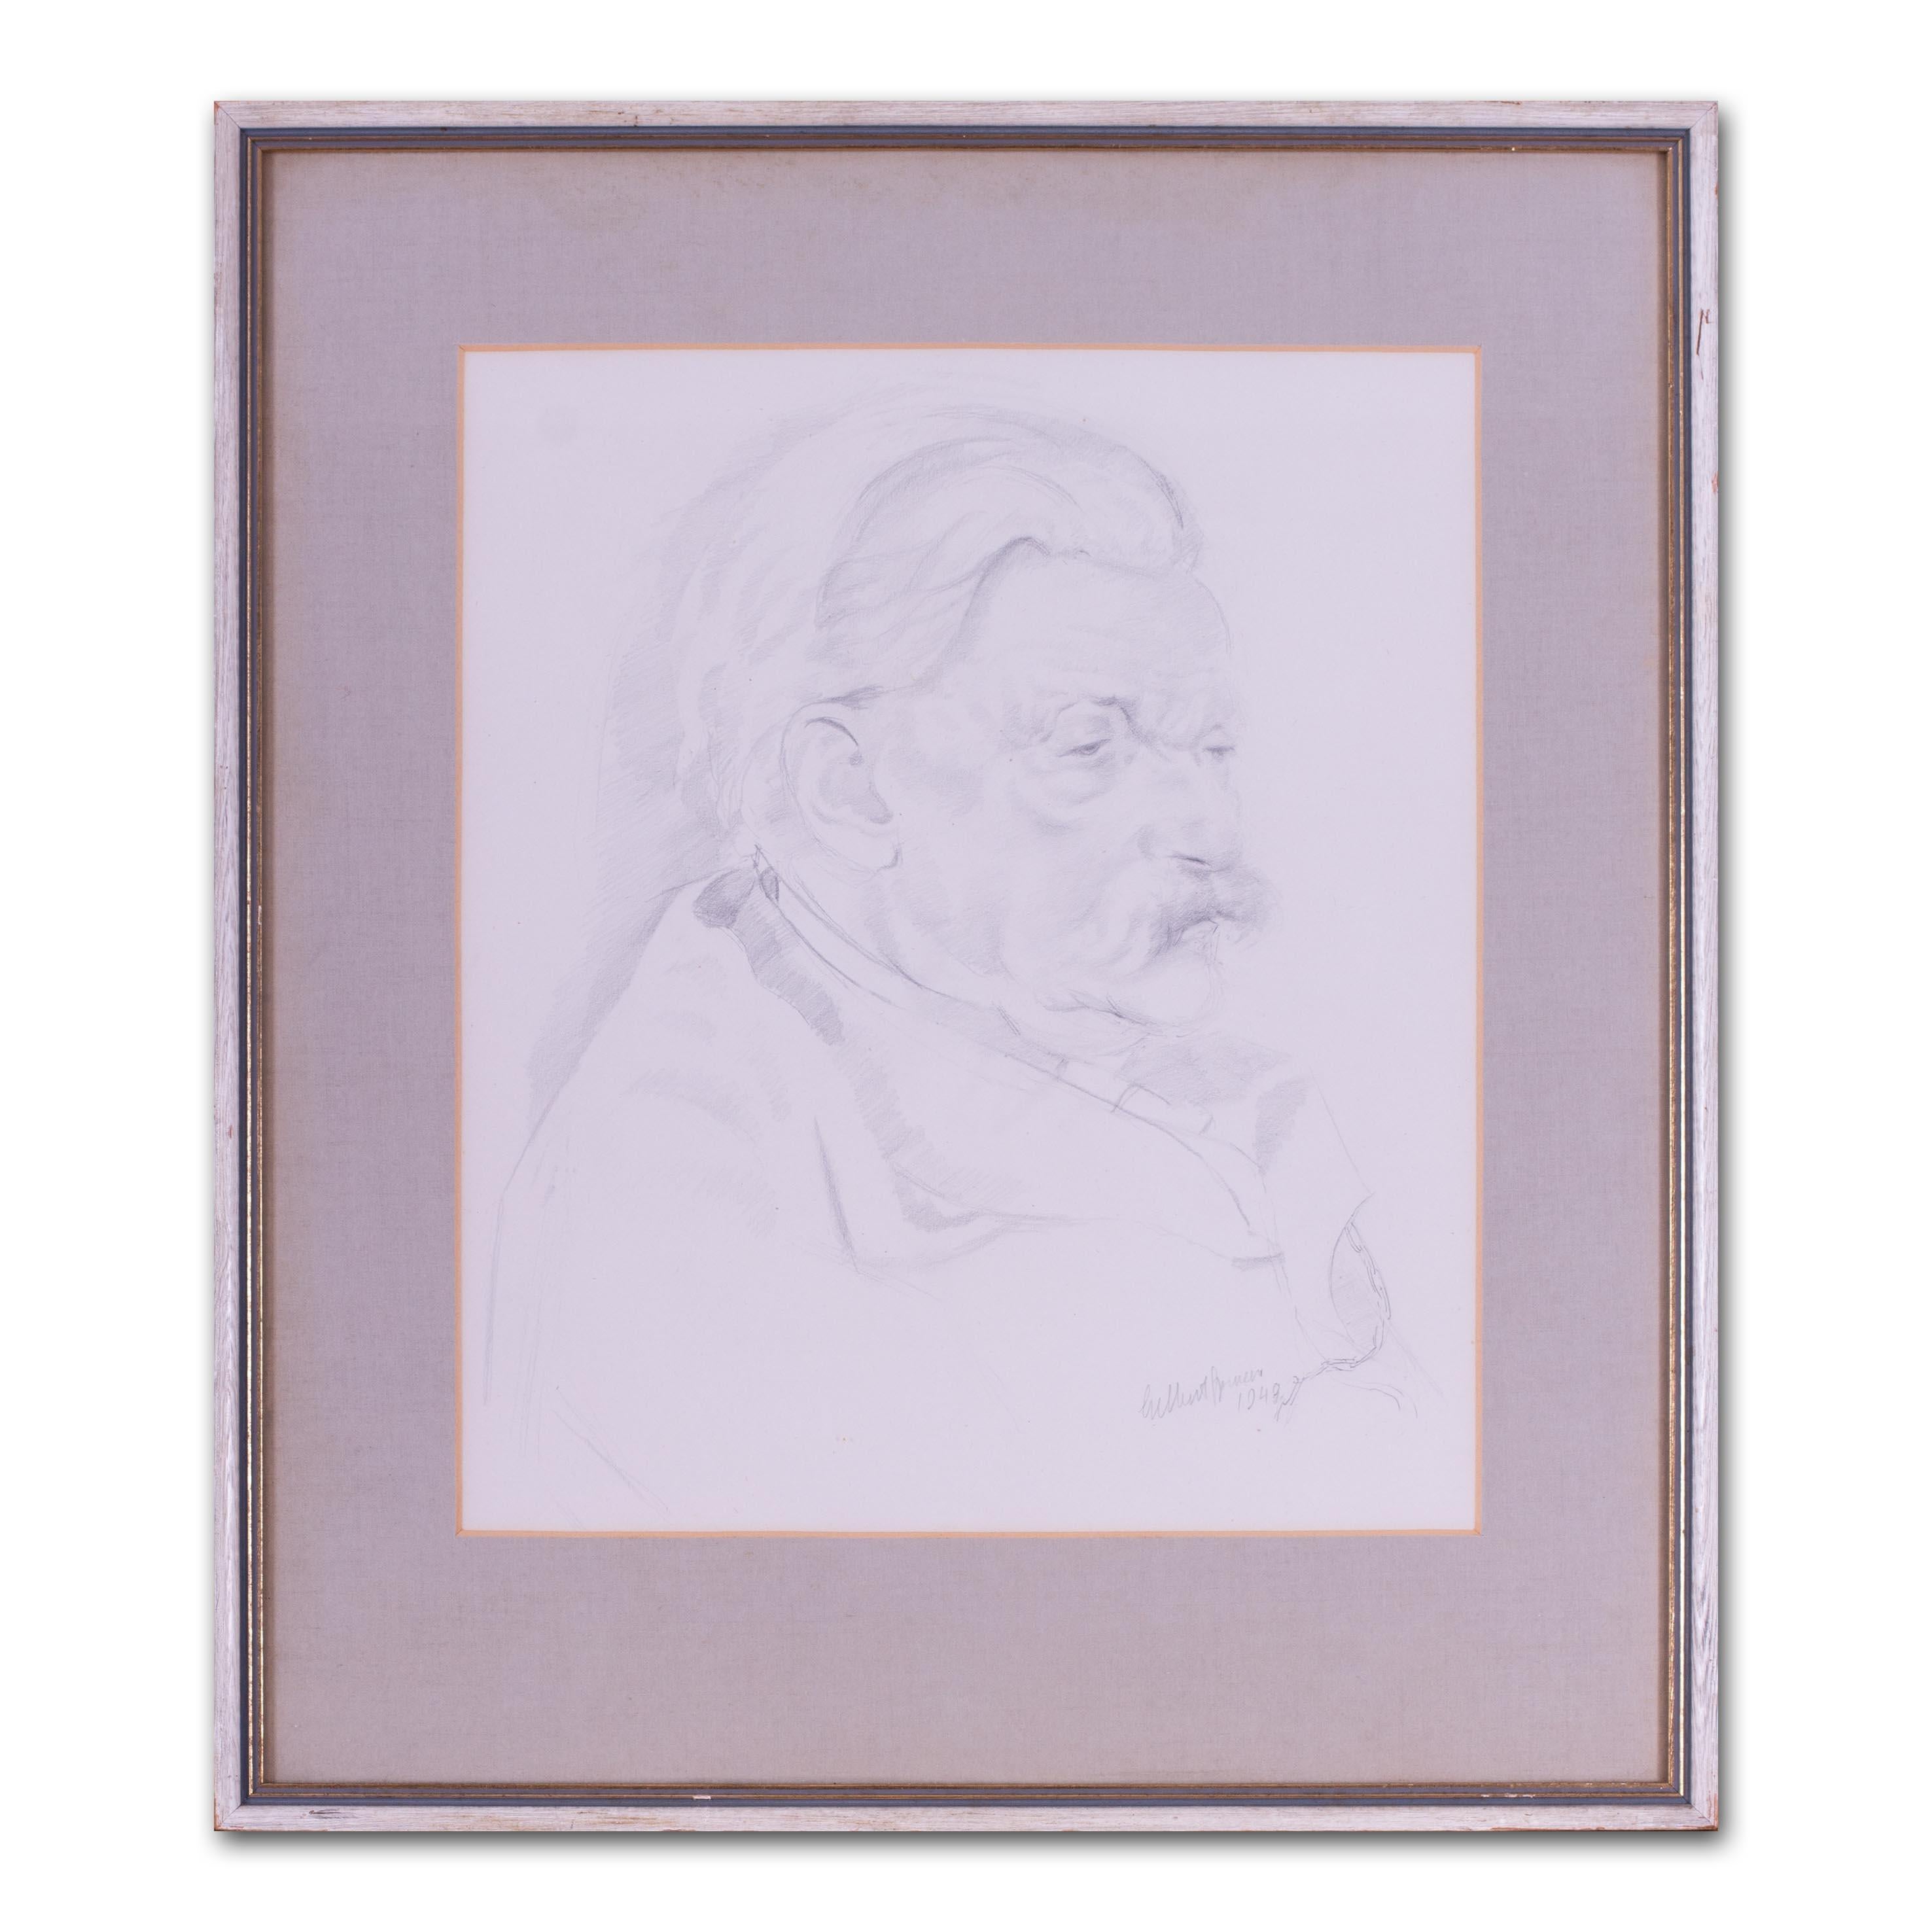 Gilbert Spencer RA, RWS, NEAC (British, 1892-1959)
Portrait of William Dockar Drysdale
pencil
Signed and dated `Gilbert Spencer/ 1949’ (lower right)
15.3/4 x 13 in. (40 x 33 cm.)
